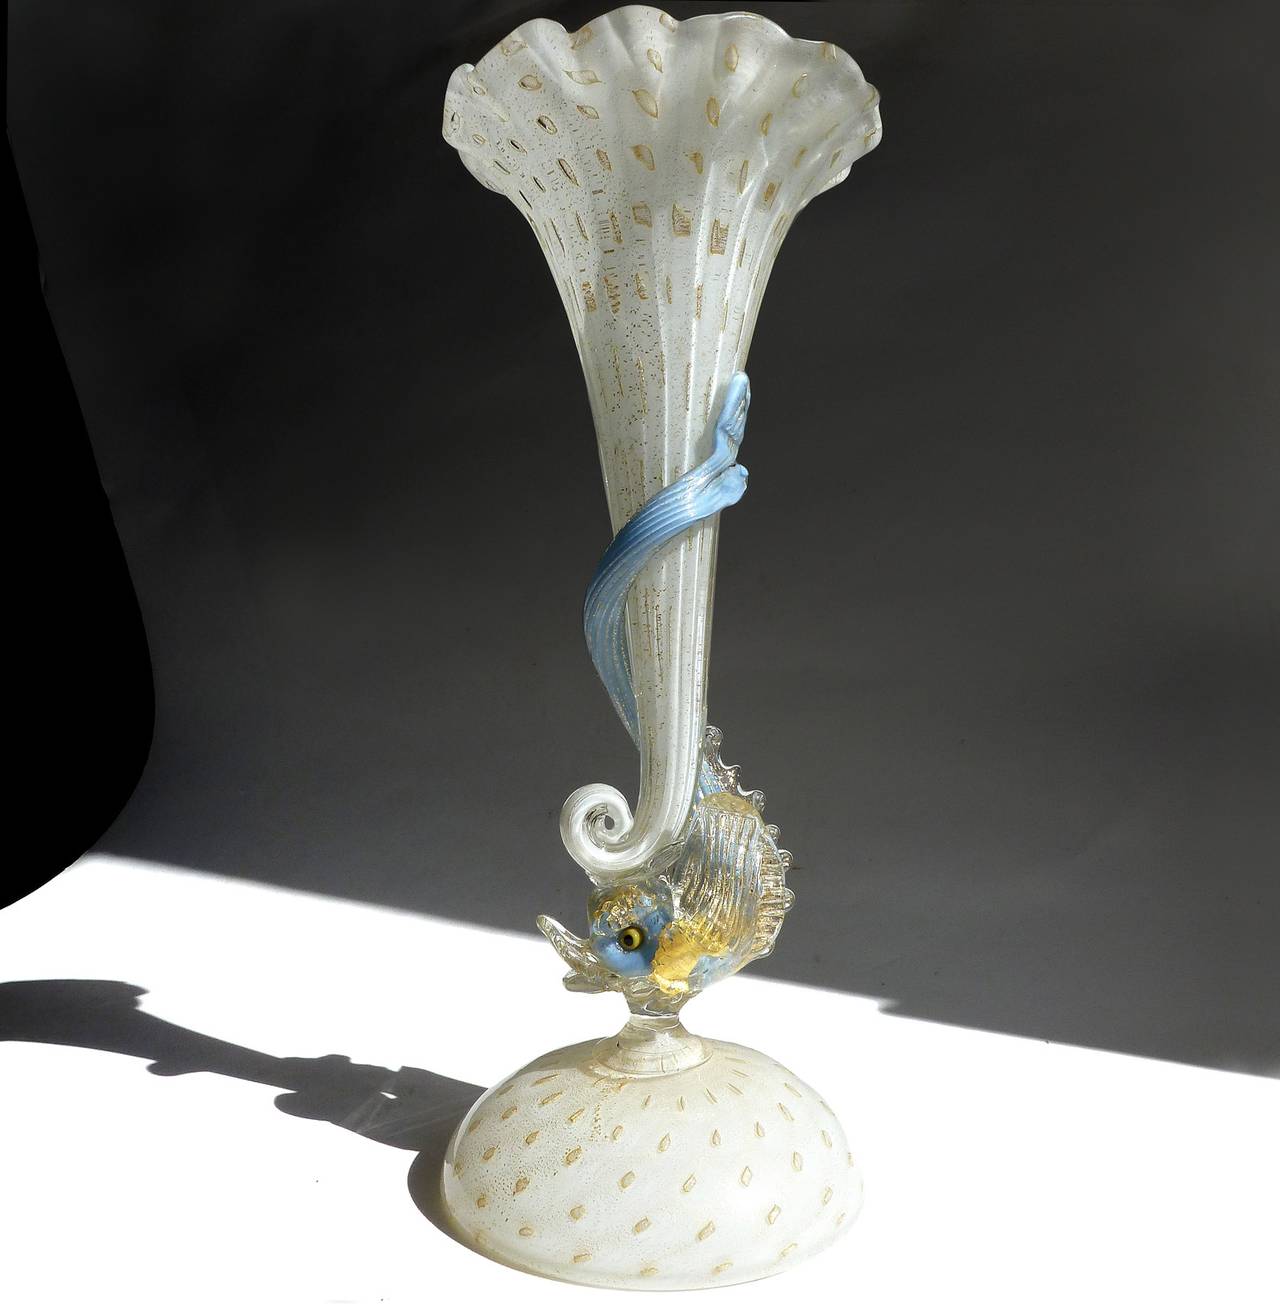 Free shipping worldwide! See details below description.

Elegant Murano handblown white, gold flecks and ruffled rim trumpet vase with blue fish decoration. Attributed to the Salviati Company, circa 1950s. The piece is very well detailed and